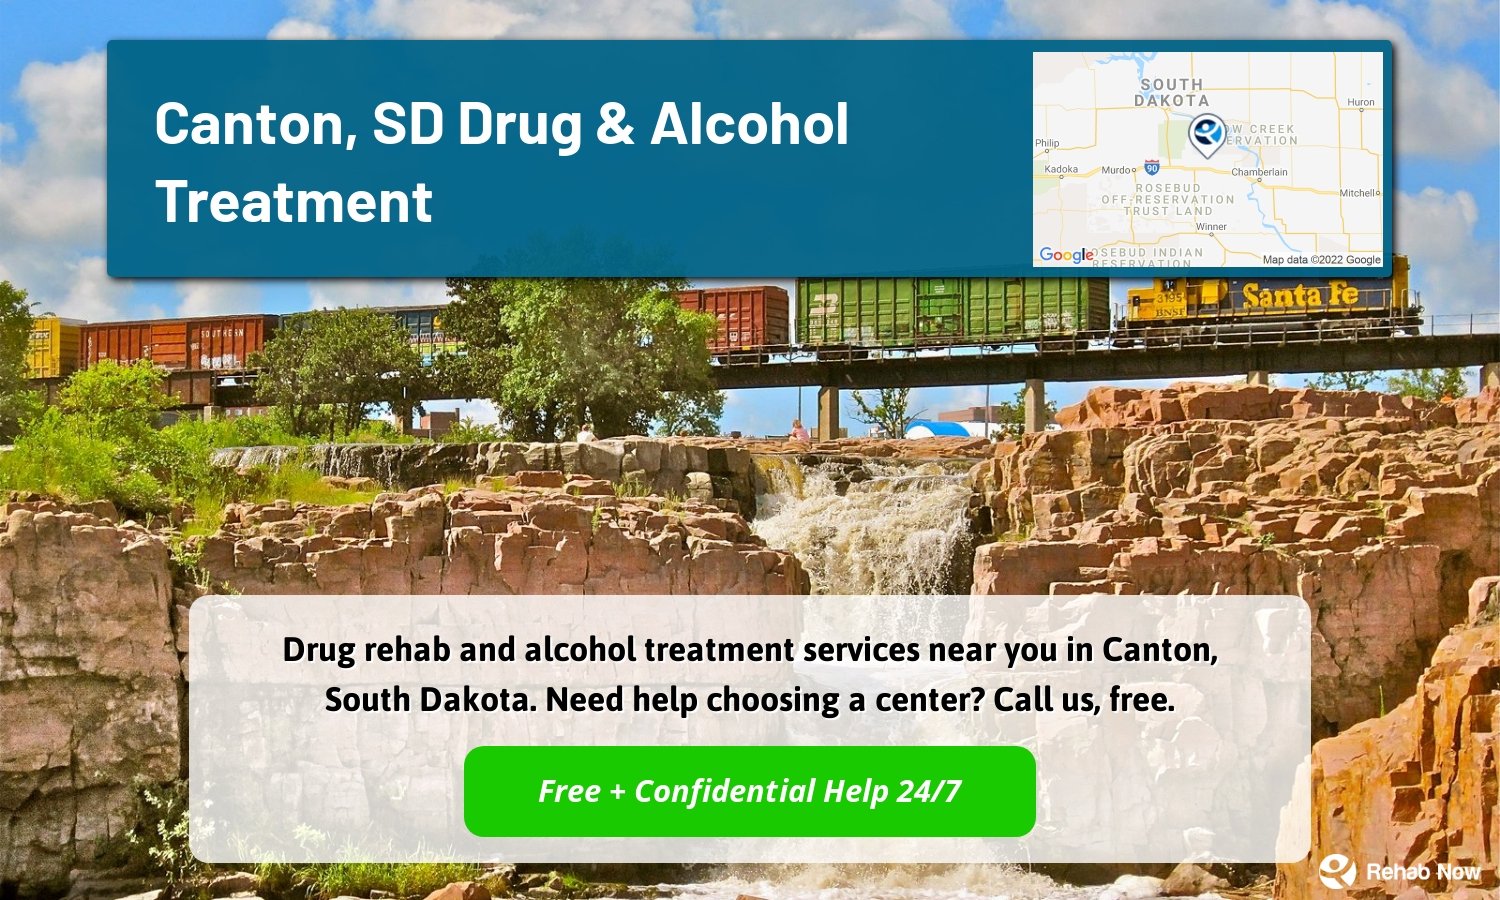 Drug rehab and alcohol treatment services near you in Canton, South Dakota. Need help choosing a center? Call us, free.